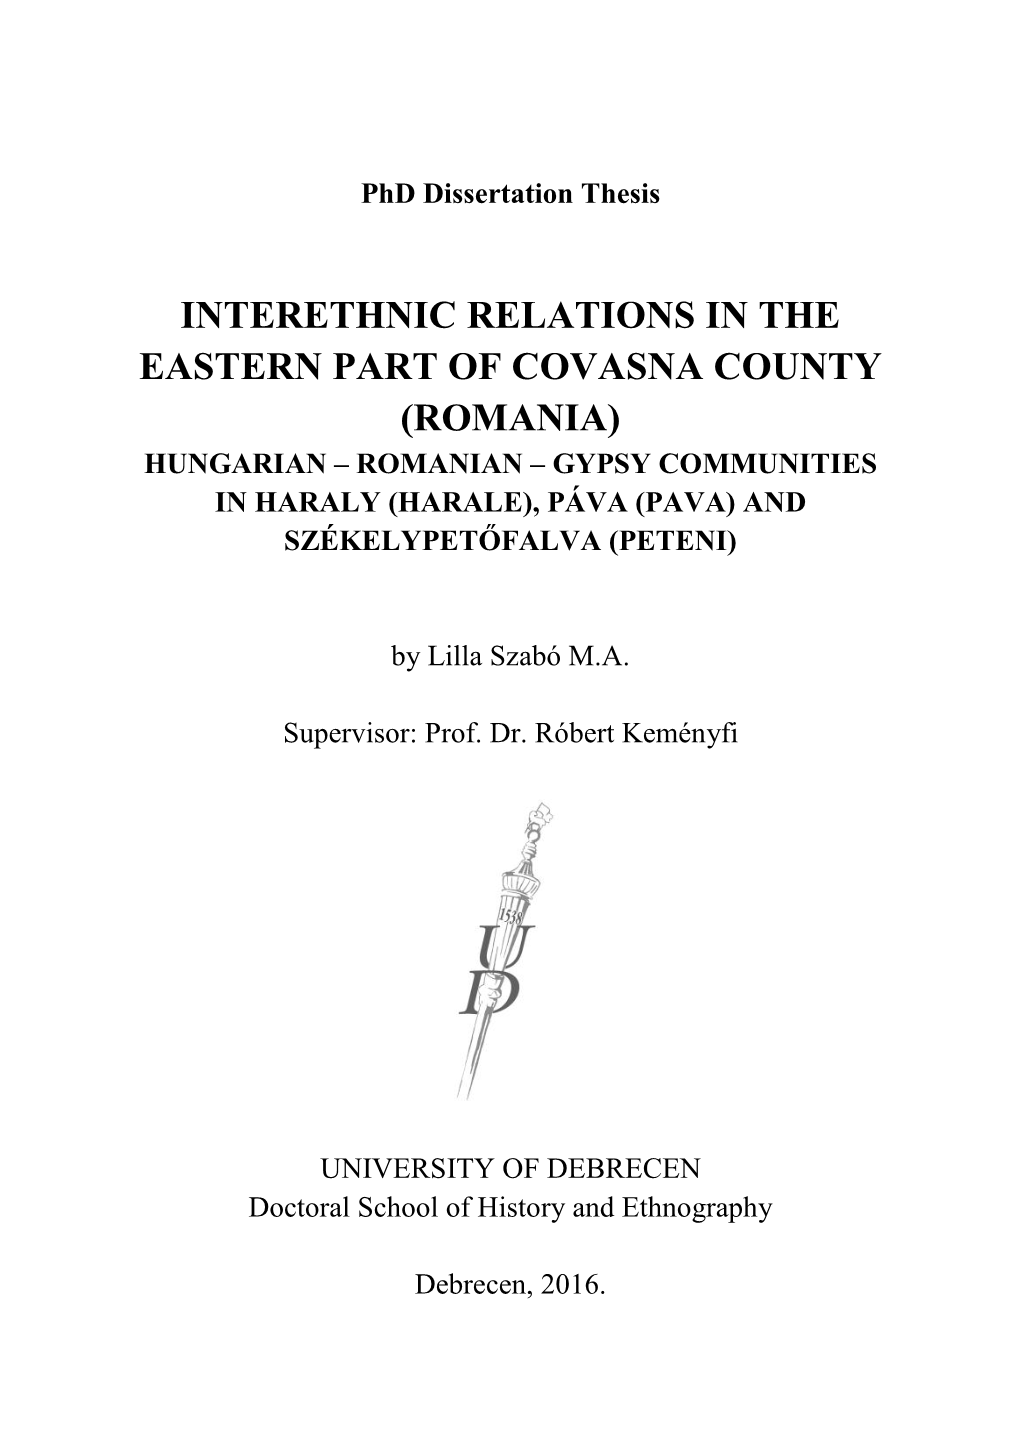 Interethnic Relations in the Eastern Part Of